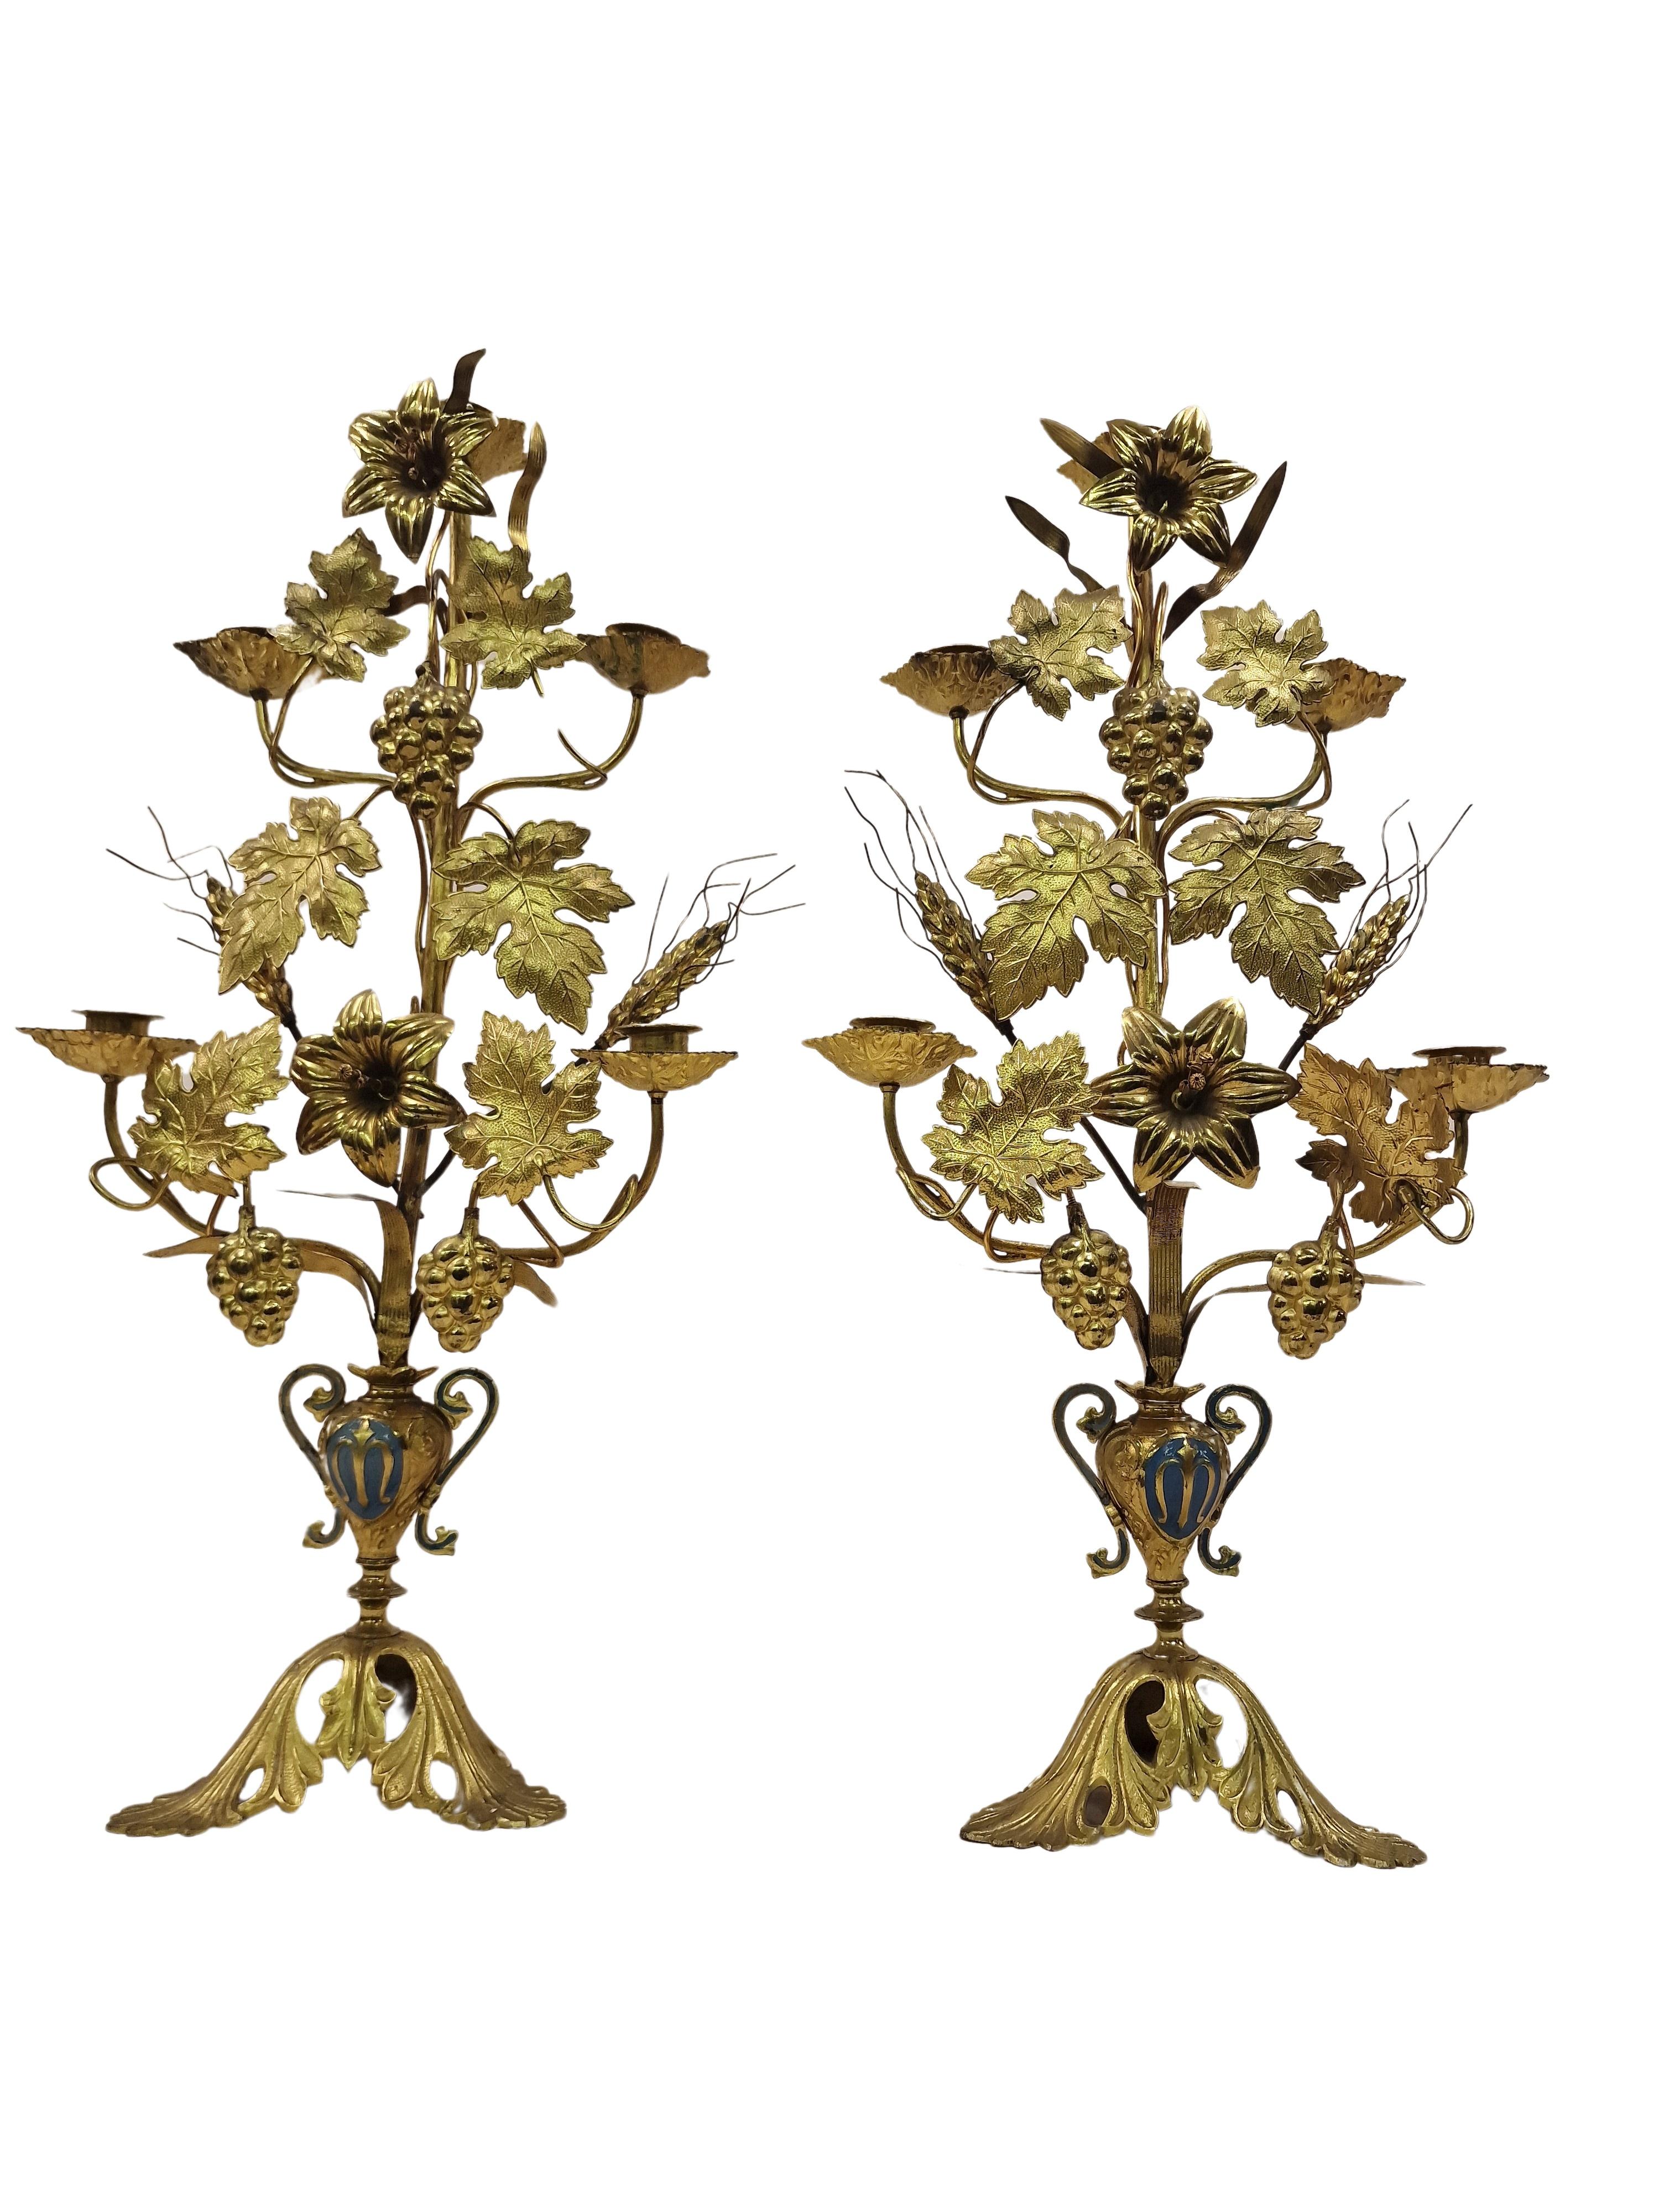 Pair of two wonderful thanksgiving candlesticks, made out of brass firegilt, in the 1900s in France. 

Candlesticks like these were displayed in the church to thanksgiving. The objects are highly decorative and consist of a base, which is designed